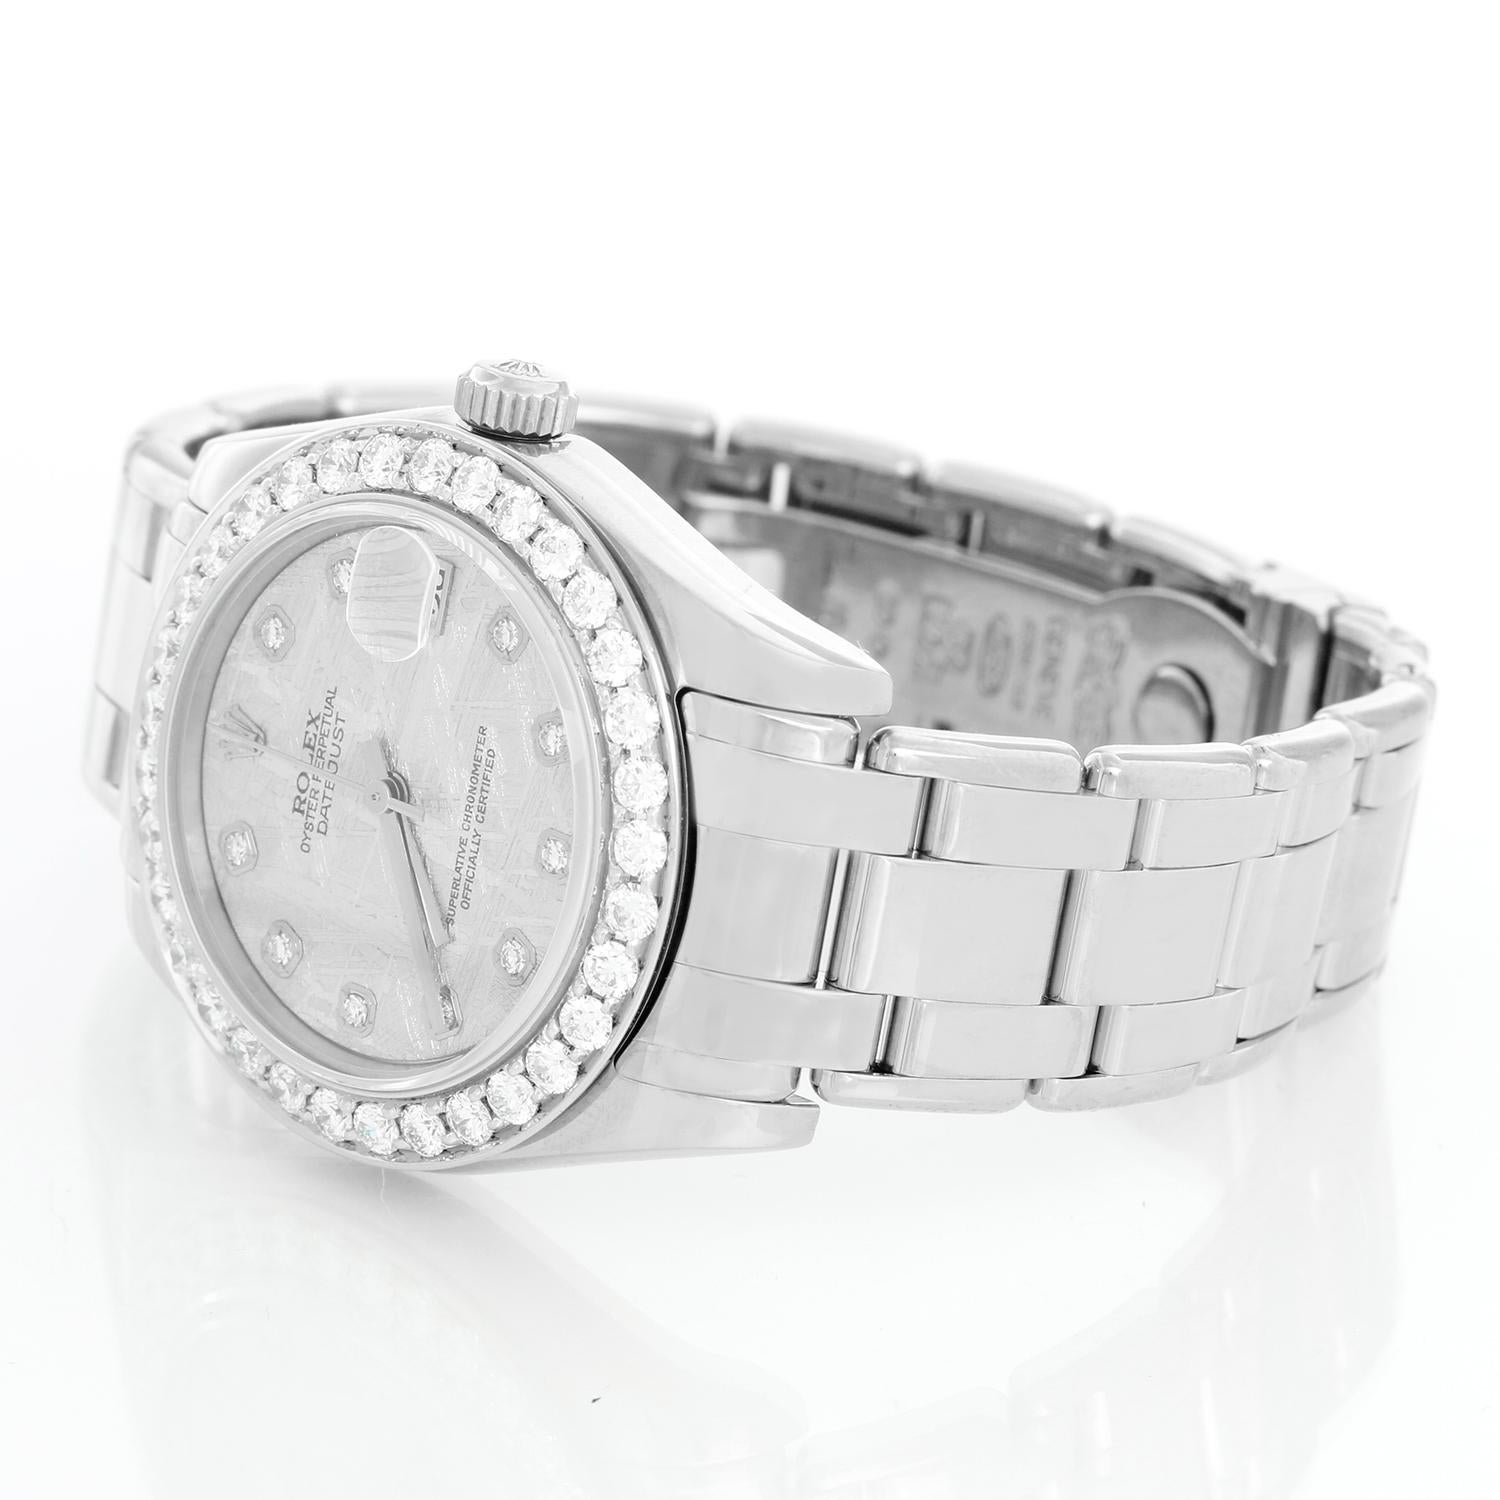 Rolex Ladies Pearlmaster Midsize White Gold Watch 81209 - Automatic winding, 31 jewels, Quickset, sapphire crystal. 18k white gold case with custom diamond bezel  (34 mm ). Factory meteorite diamond dial. 18k white gold Pearlmaster bracelet.